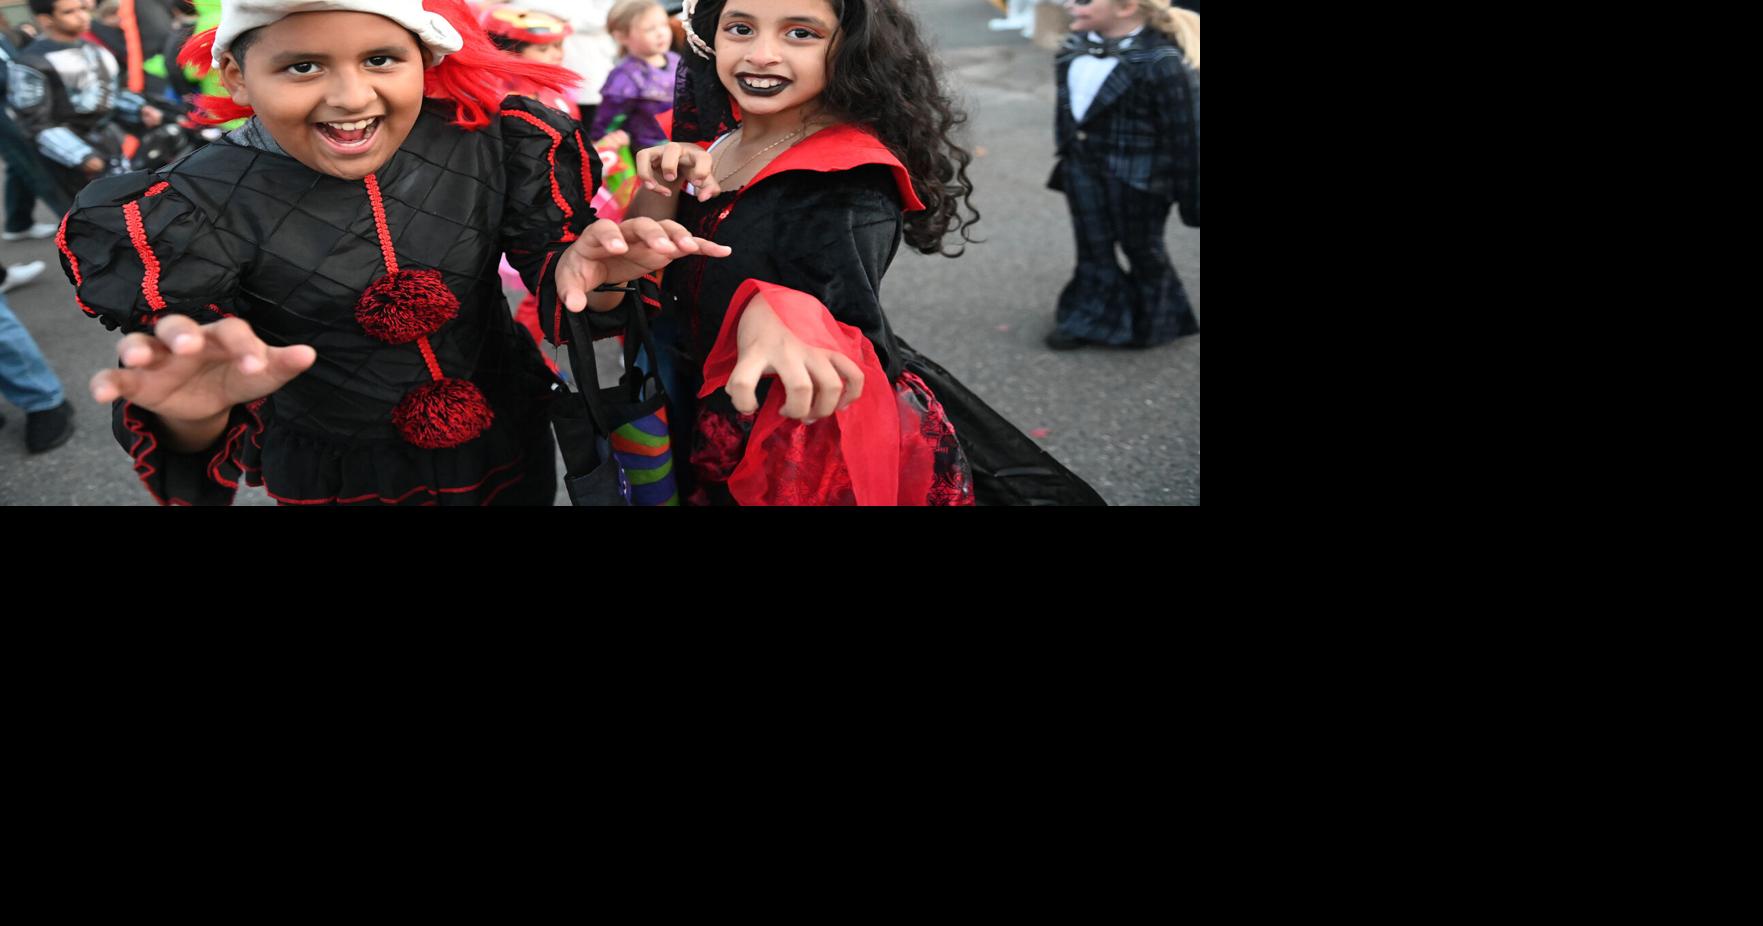 Ghouls come out for Methuen trunkortreat Merrimack Valley